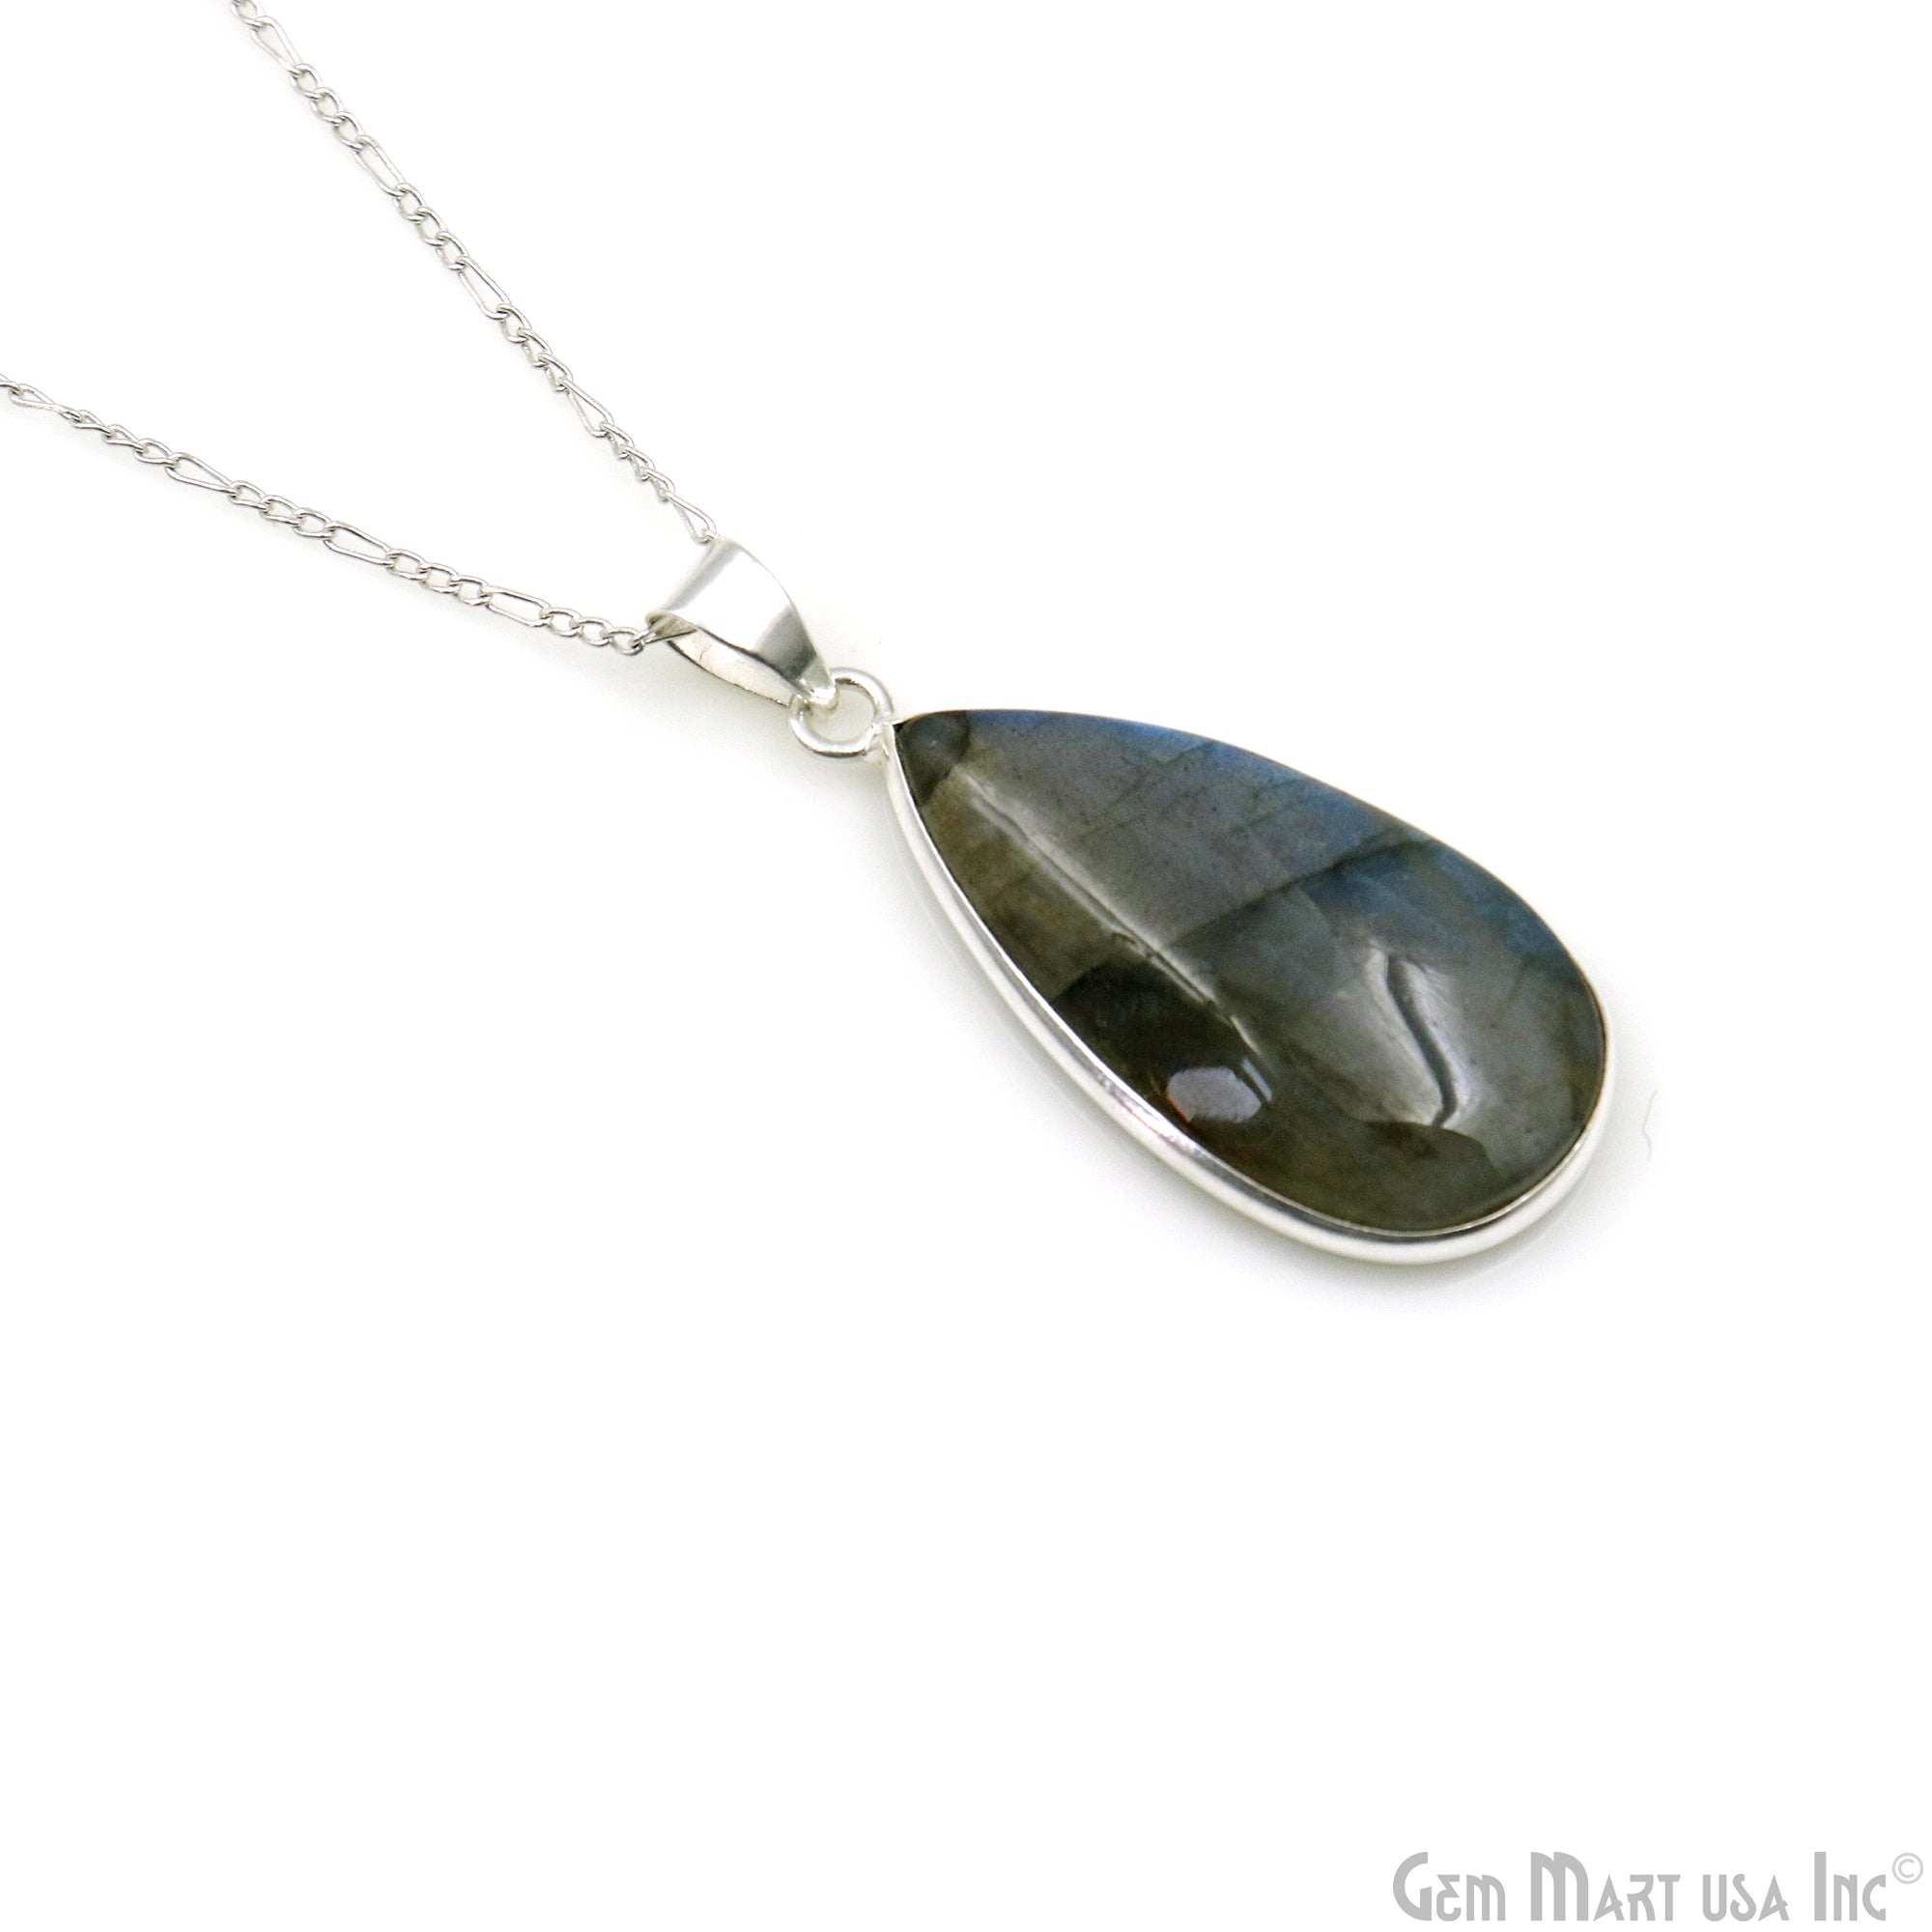 Labradorite Gemstone Pears 39x18mm Sterling Silver Necklace Pendant 1PC